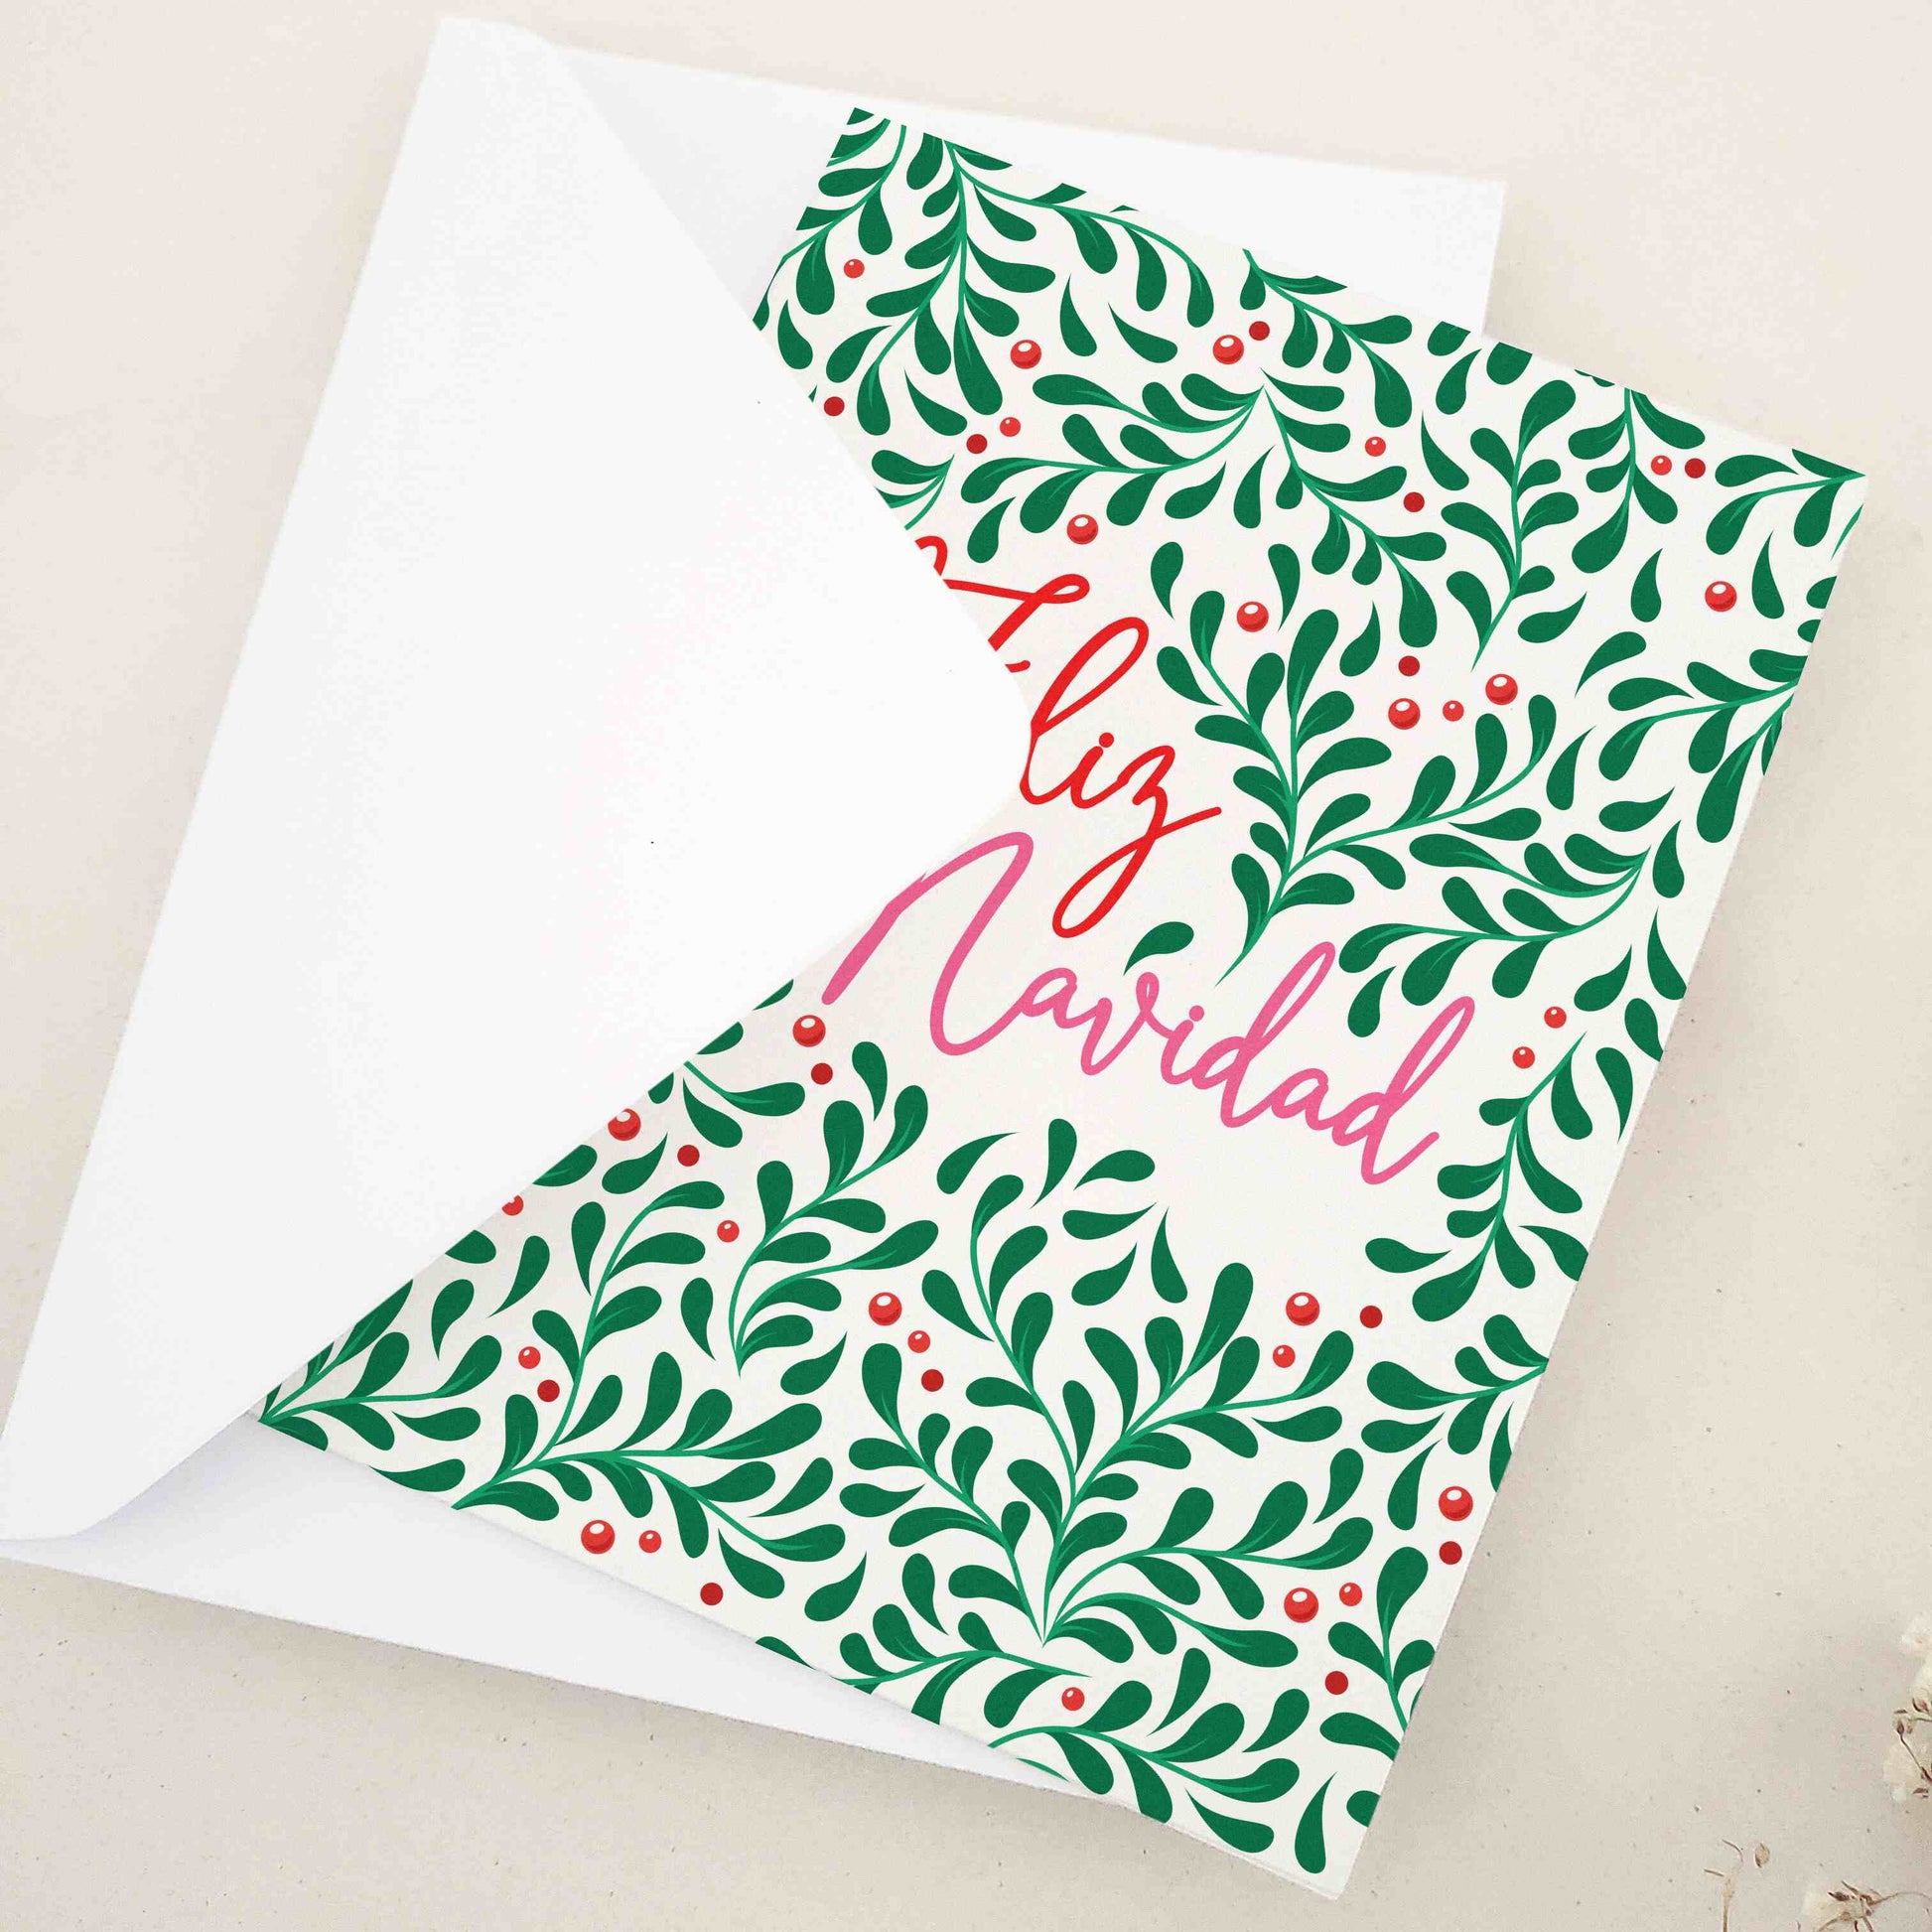 Vibrant 'Feliz Navidad' card, richly decorated with a lush pattern of greenery and berries, embodying the traditional charm and warmth of Hispanic culture. The design, symbolizing life and joy, is a heartwarming choice for conveying holiday wishes, offering a visually stunning and meaningful way to share season's greetings.